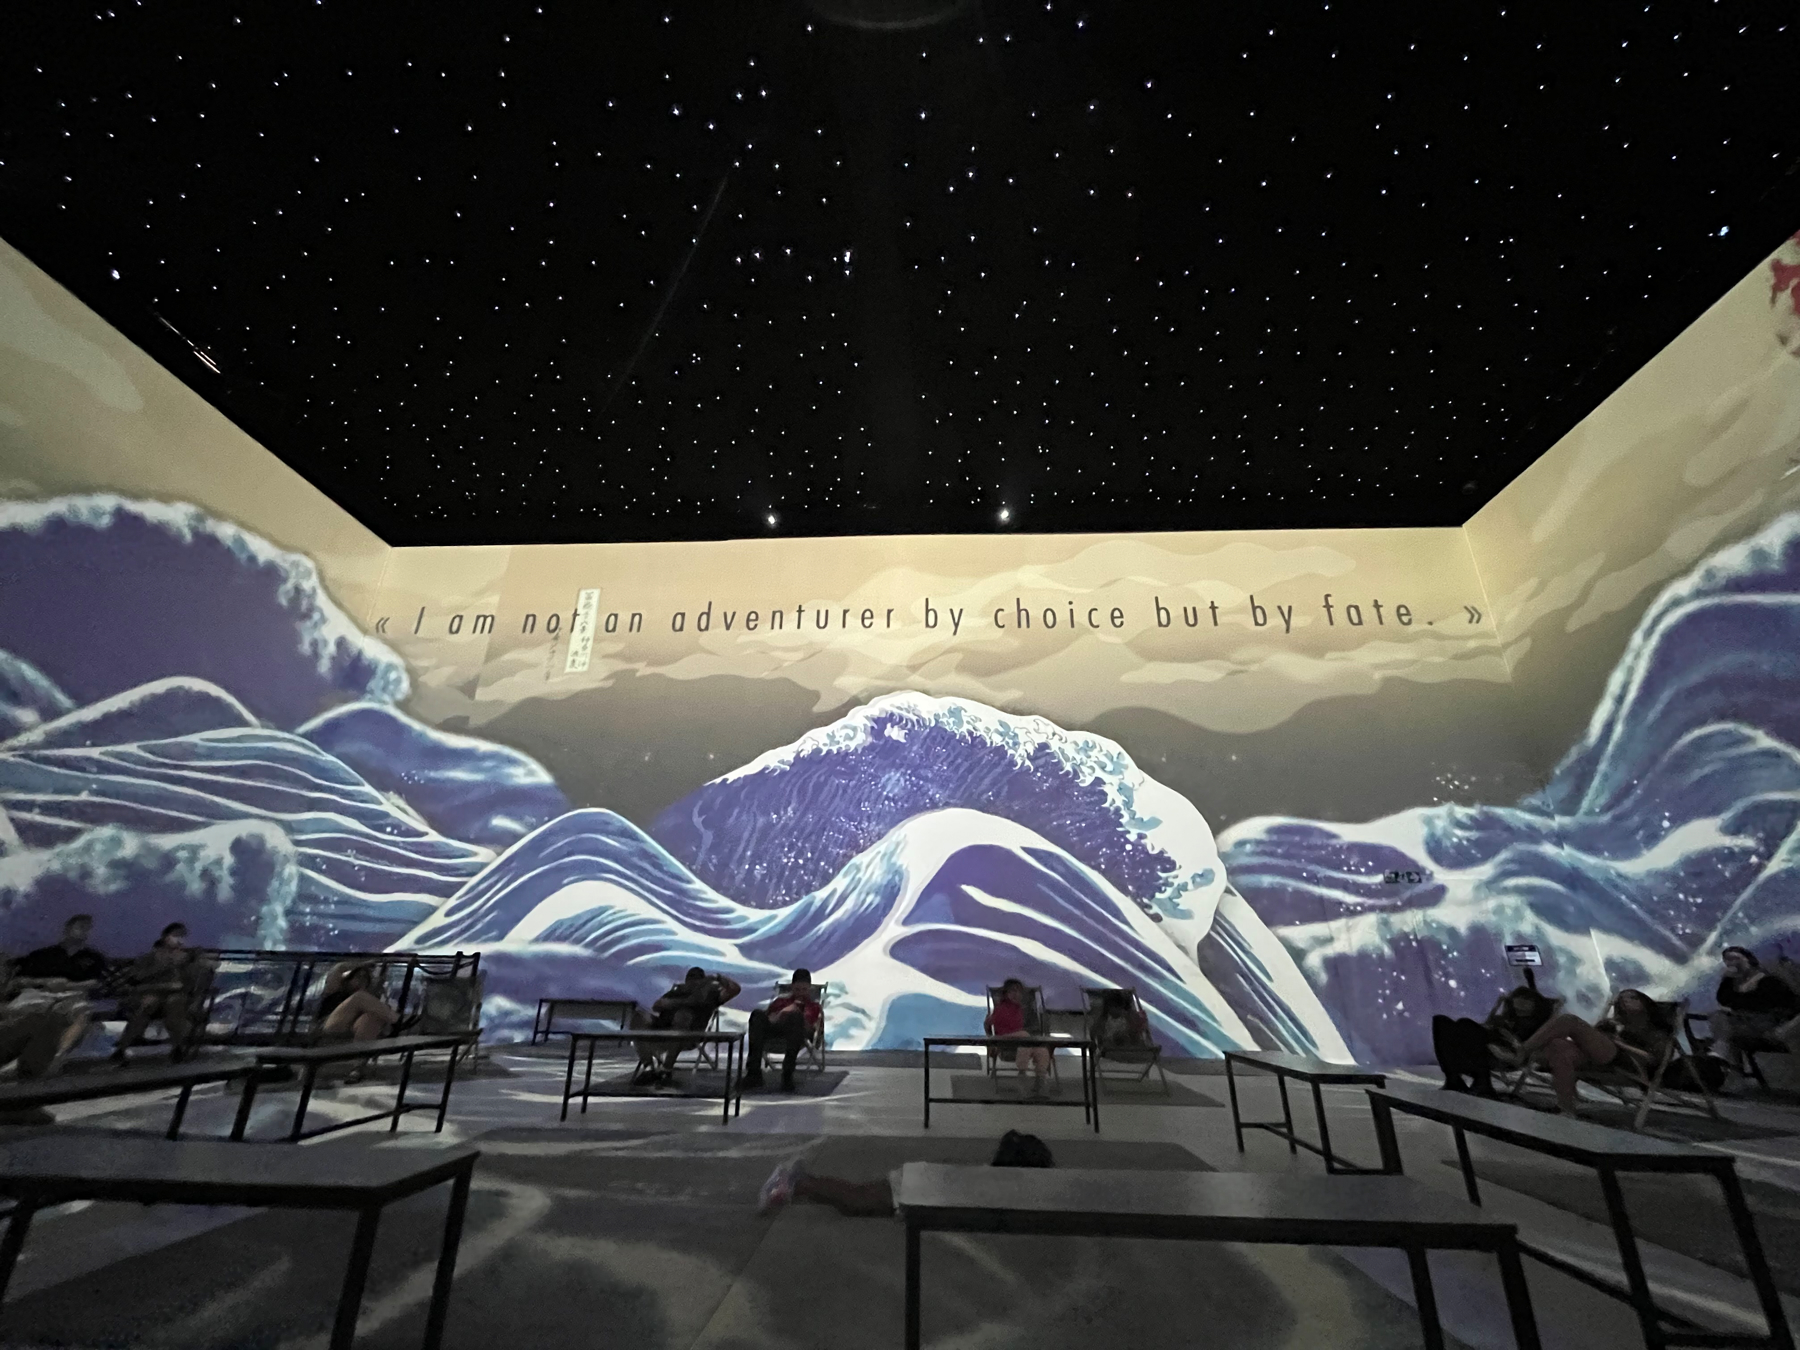 Some waves from a Van Gogh painting projected onto the walls of the exhibition